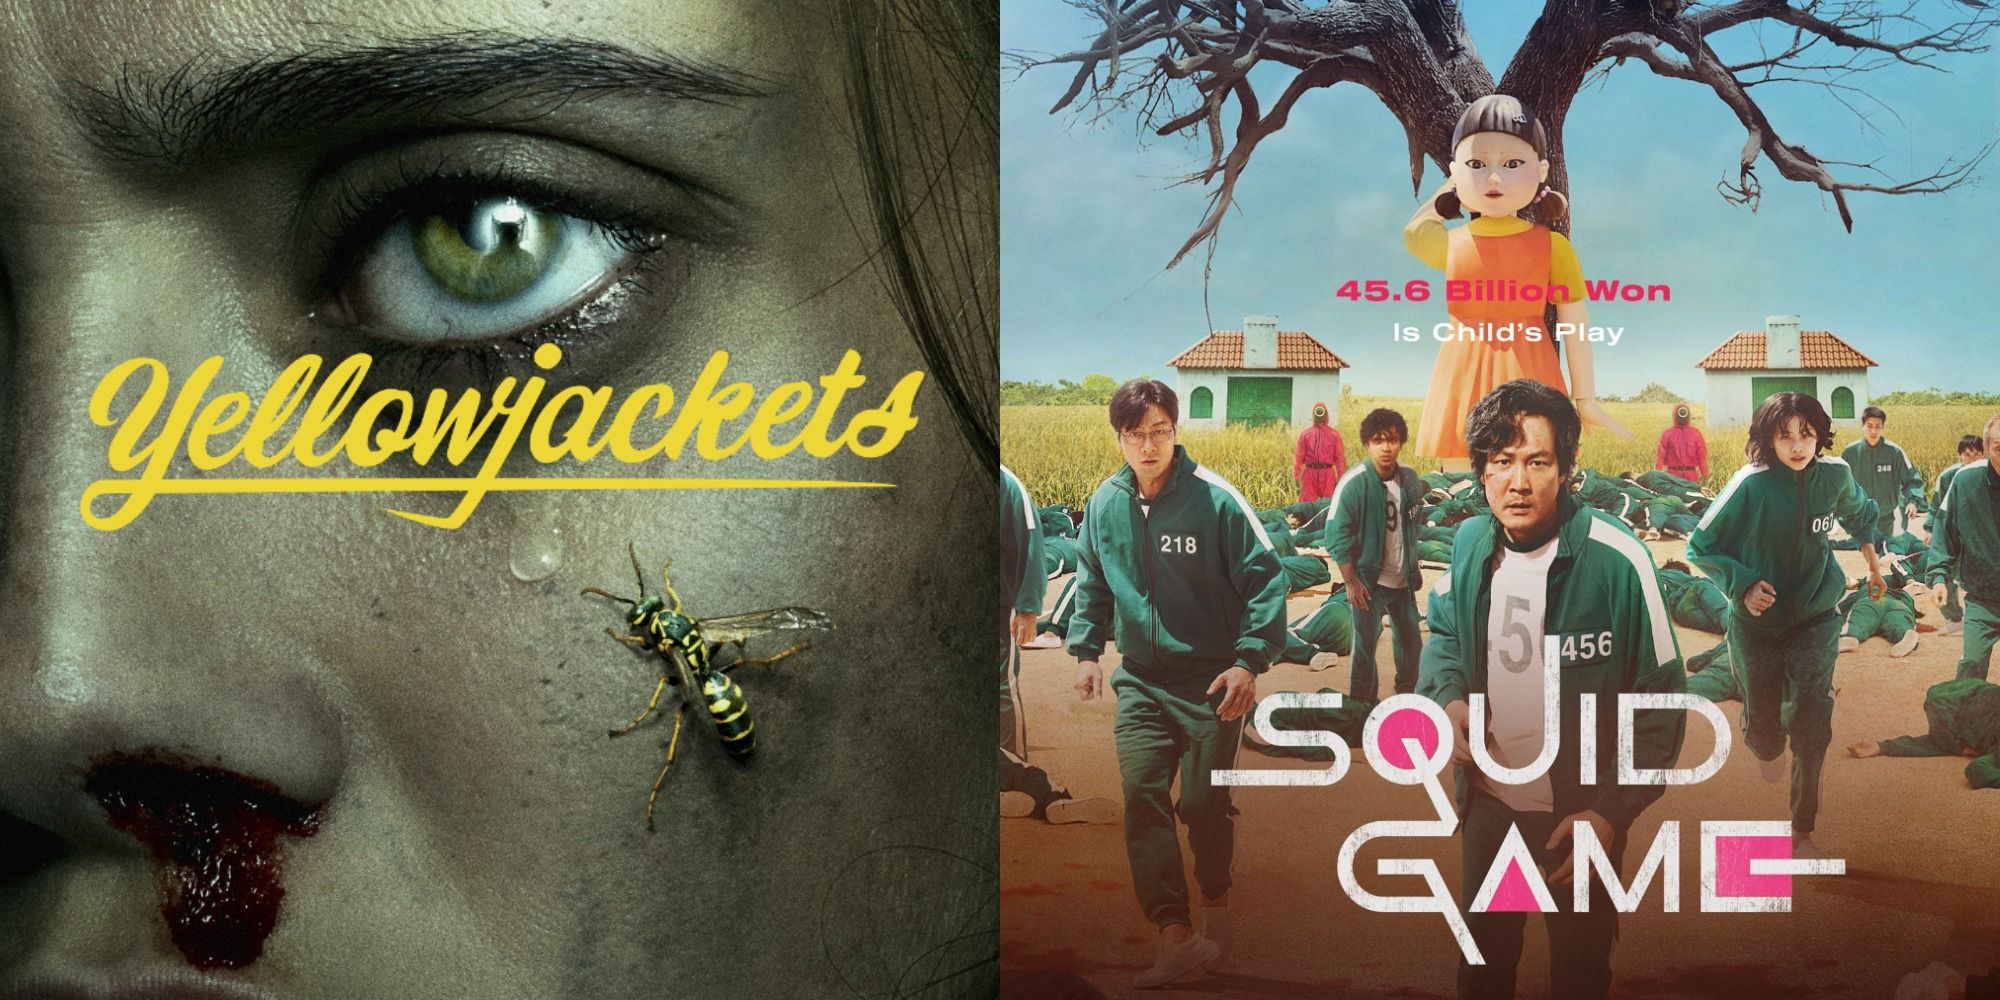 Split image showing posters for Yellowjackets and Squid Game.